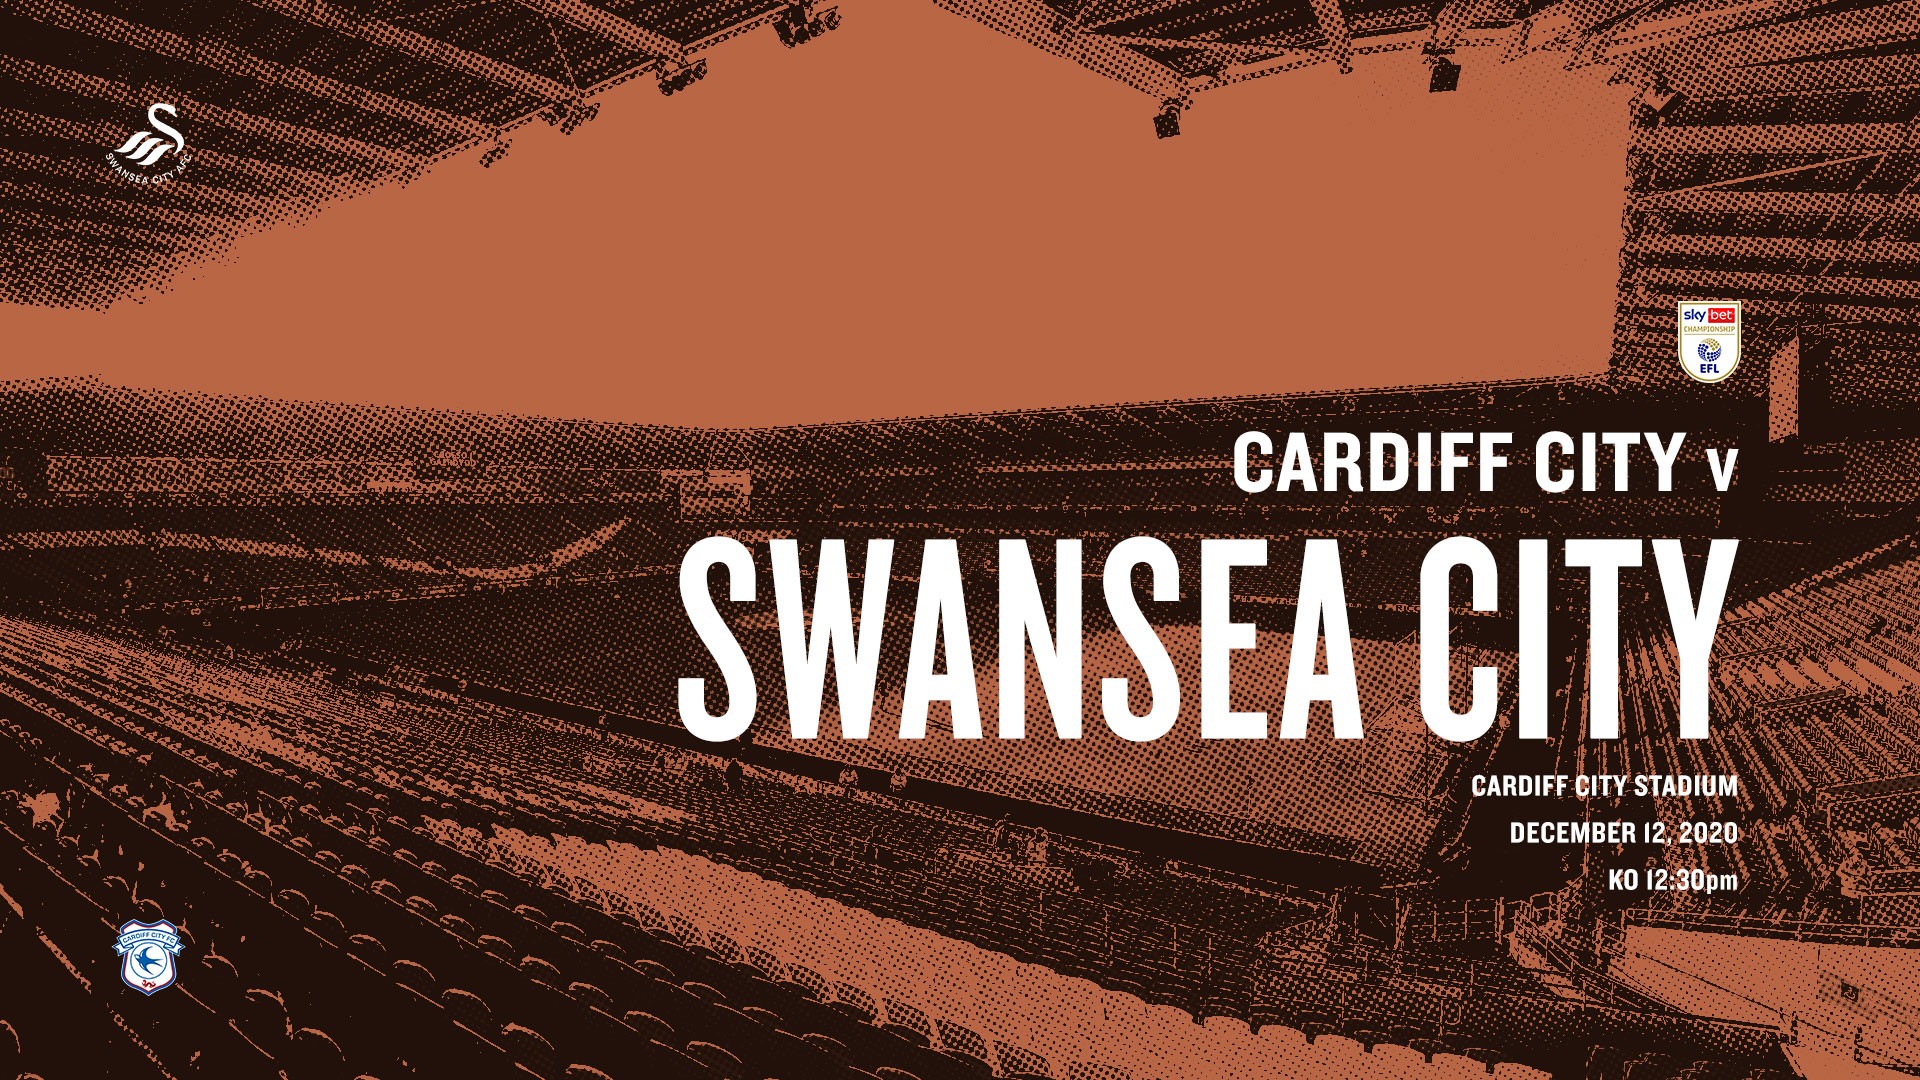 Cardiff City away preview graphic